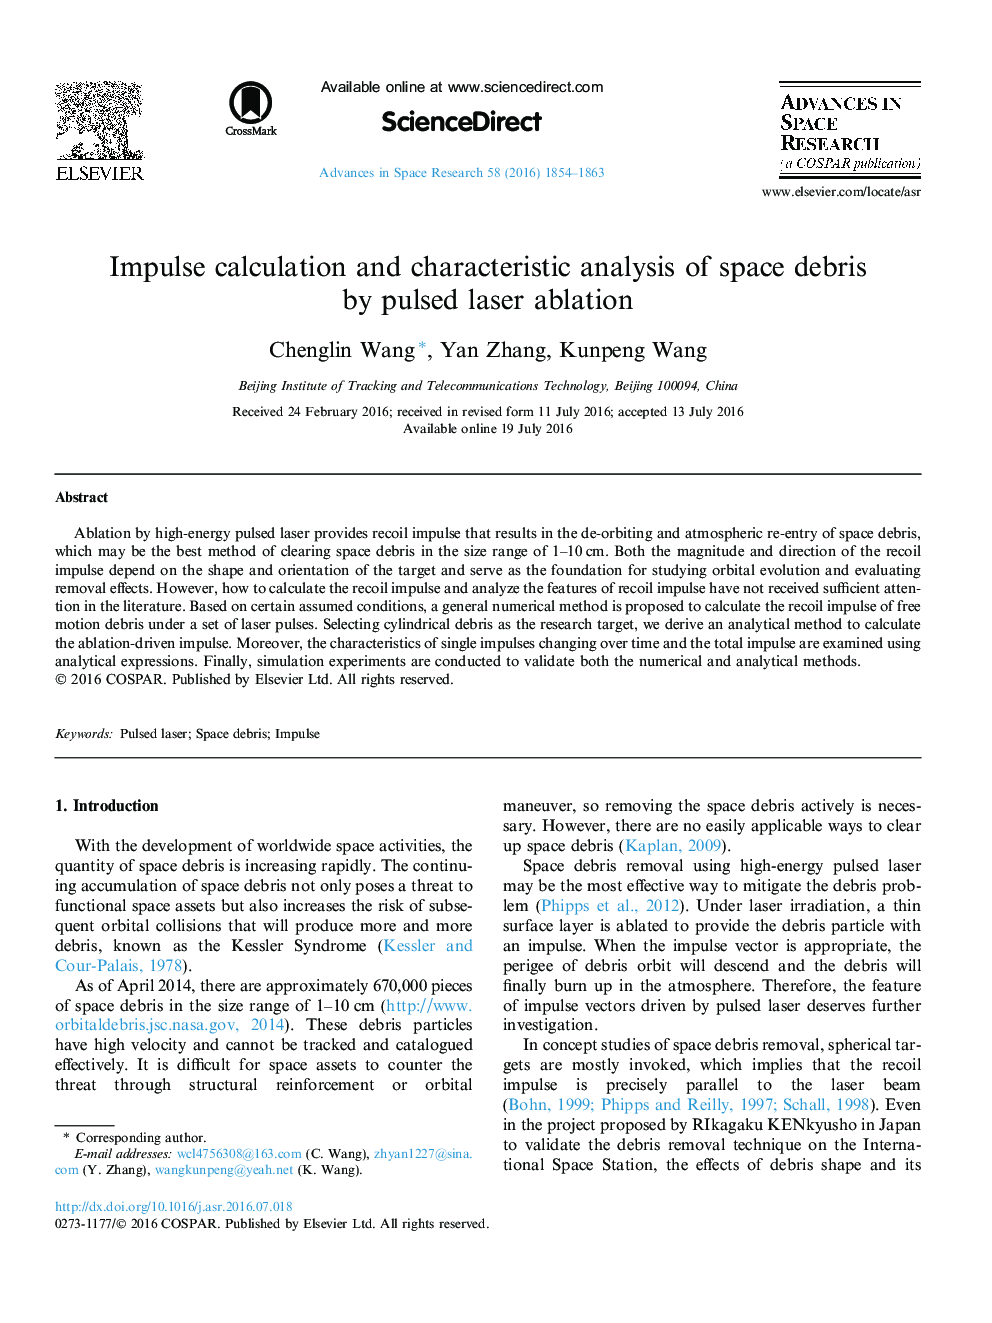 Impulse calculation and characteristic analysis of space debris by pulsed laser ablation